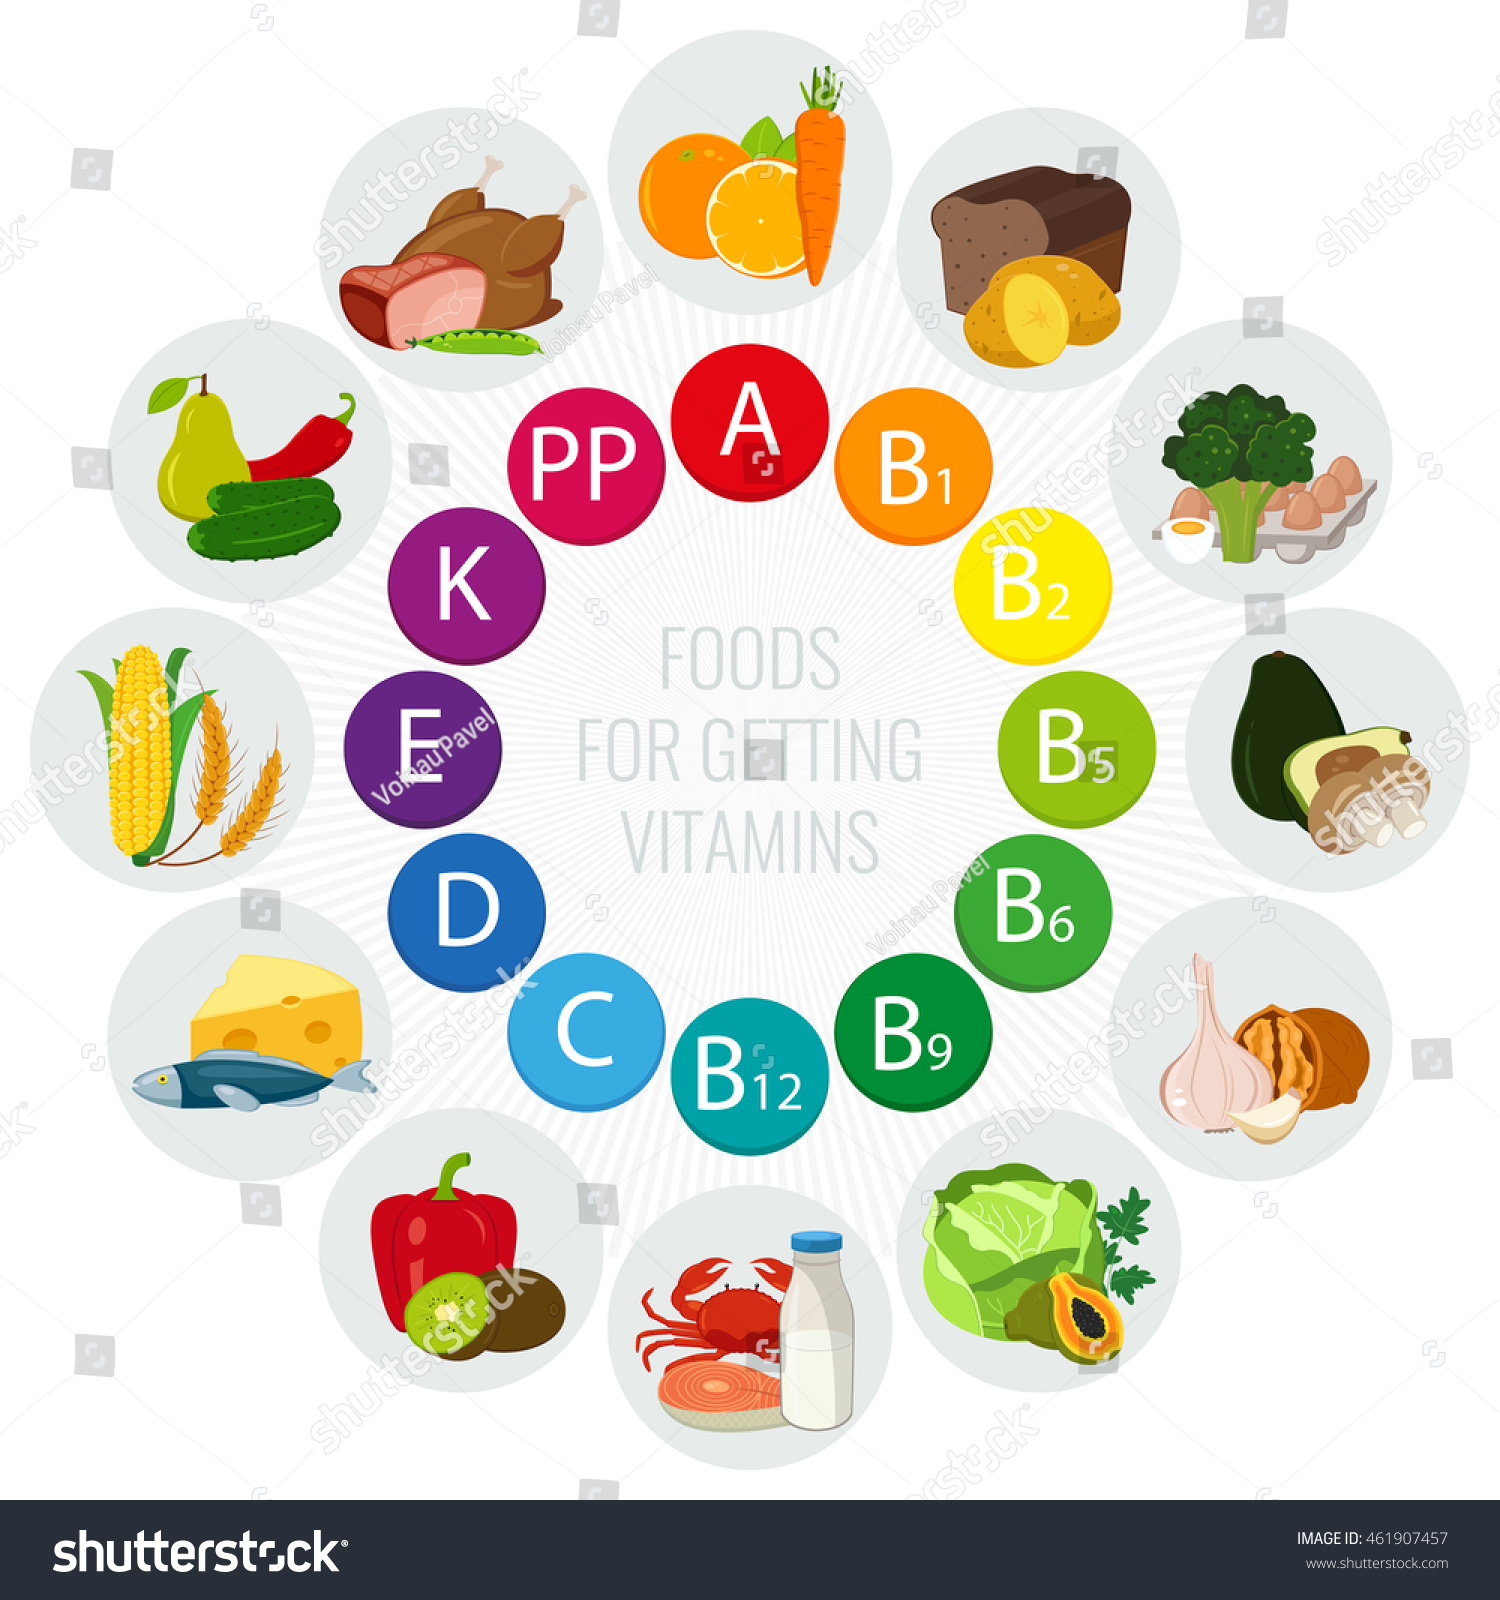 Vitamin Food Sources. Colorful Wheel Chart With Food Icons. Healthy ...